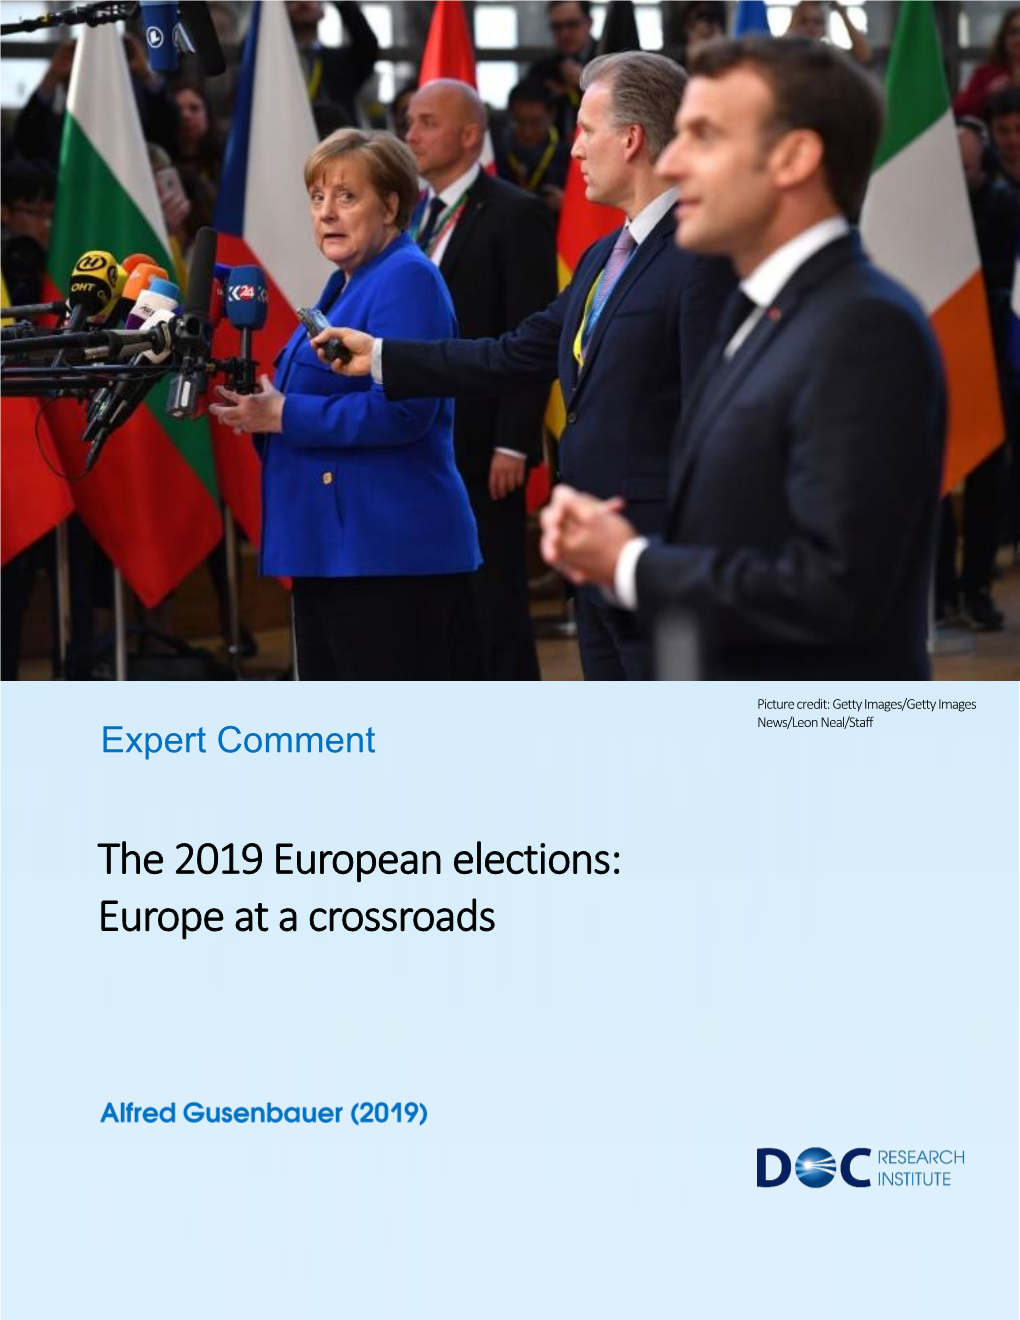 The 2019 European Elections: Europe at a Crossroads